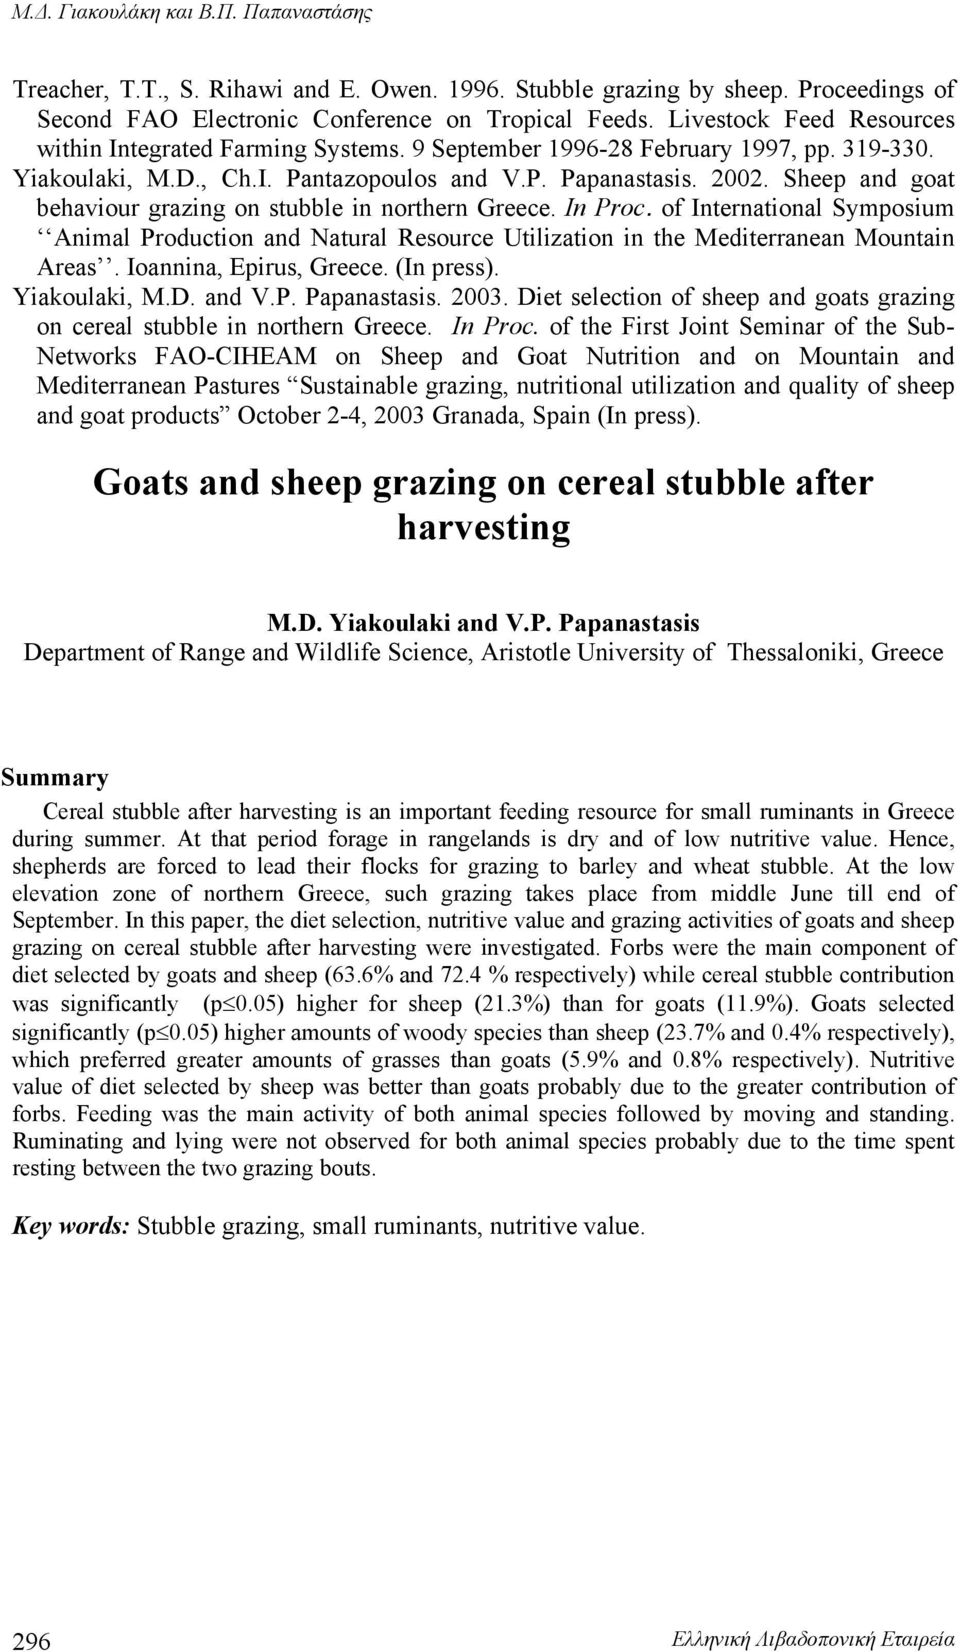 Sheep and goat behaviour grazing on stubble in northern Greece. In Proc. of International Symposium Animal Production and Natural Resource Utilization in the Mediterranean Mountain Areas.